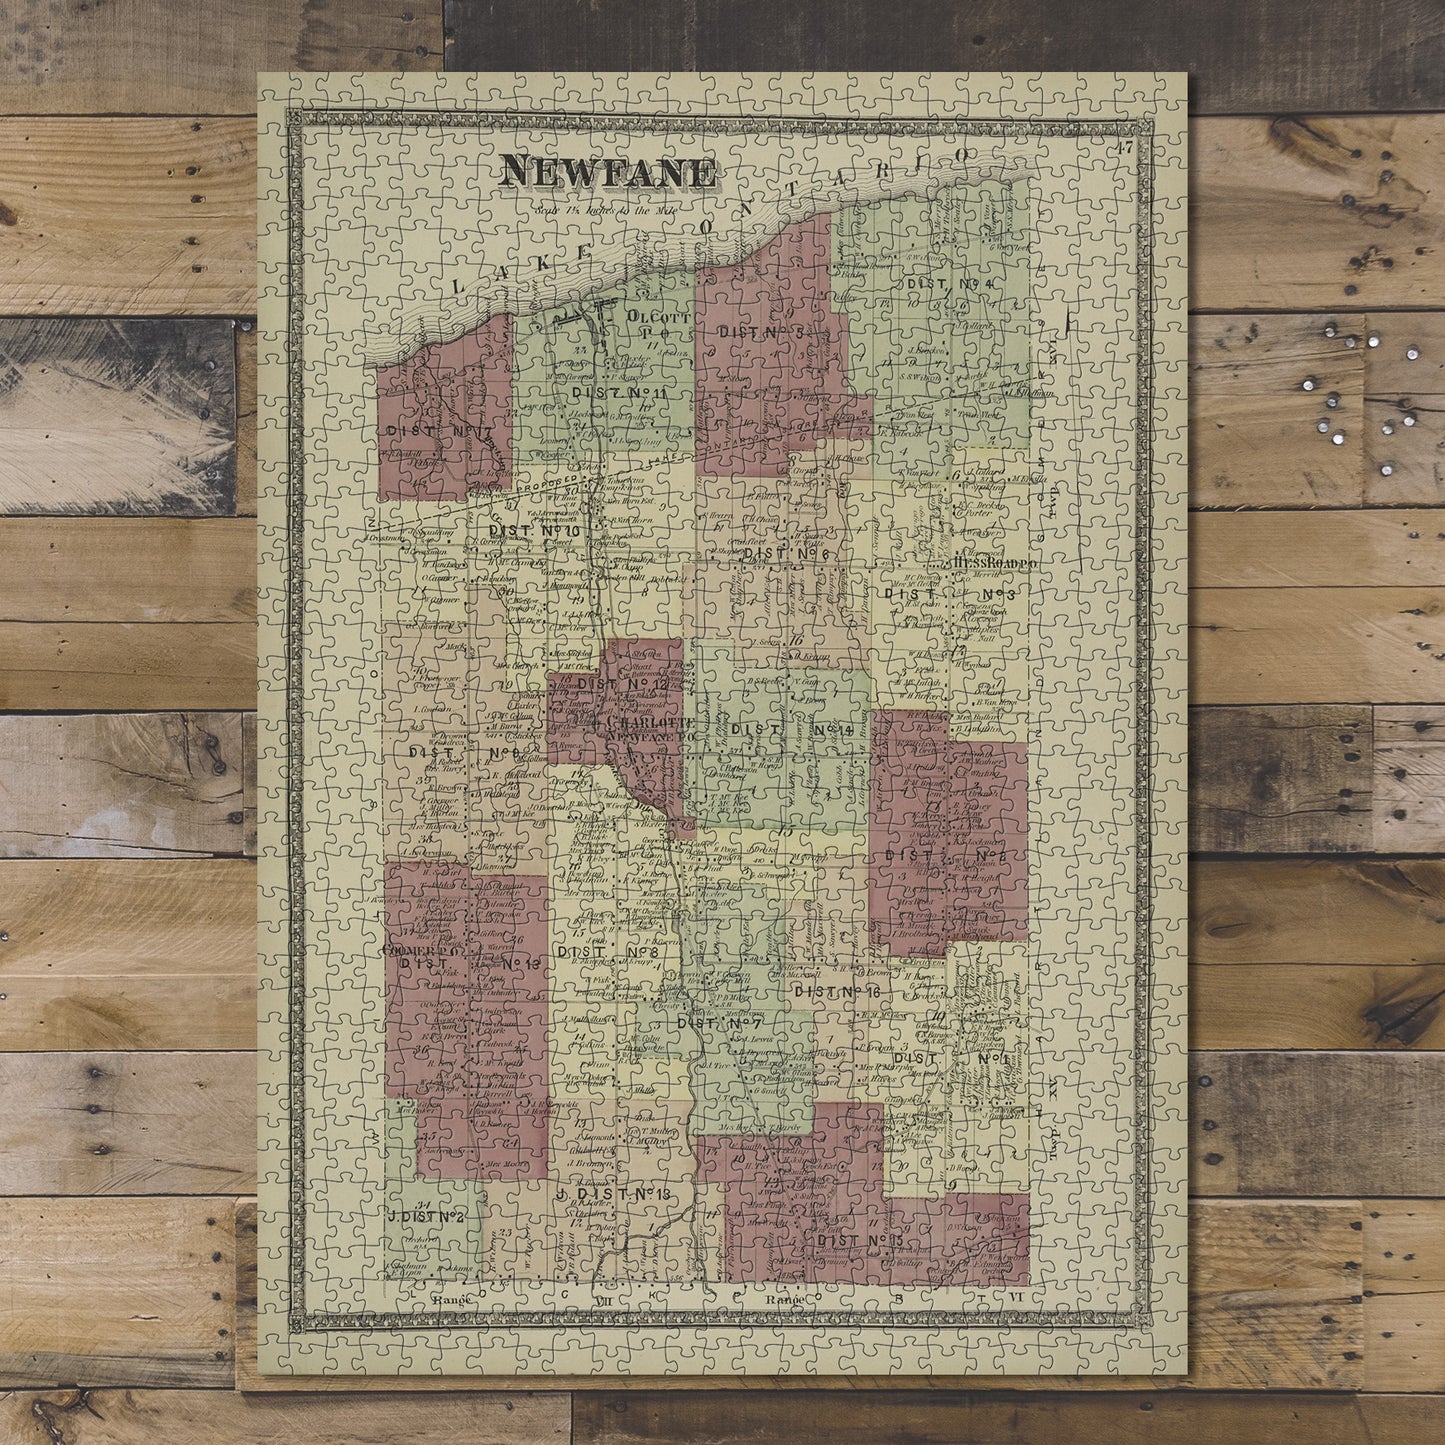 1000 Piece Jigsaw Puzzle 1875 Map of Philadelphia Newfane Townshi D.G. Beers & Co.